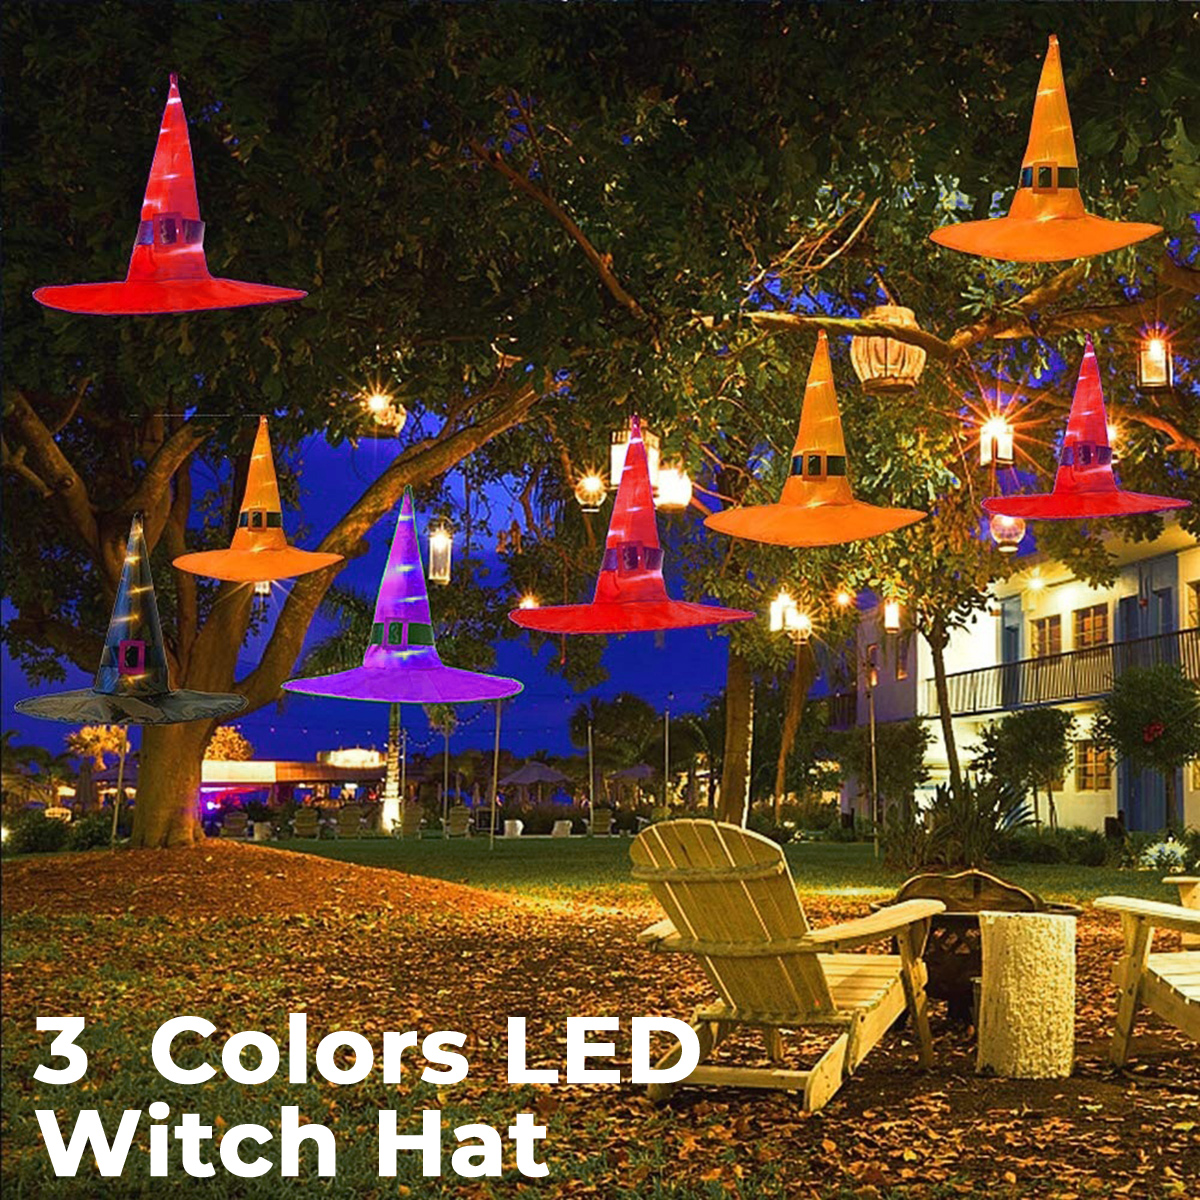 Halloween-Hanging-LED-Witch-Hat-Party-Prop-Decor-Costume-Cosplay-Accessory-Supply-1714367-1